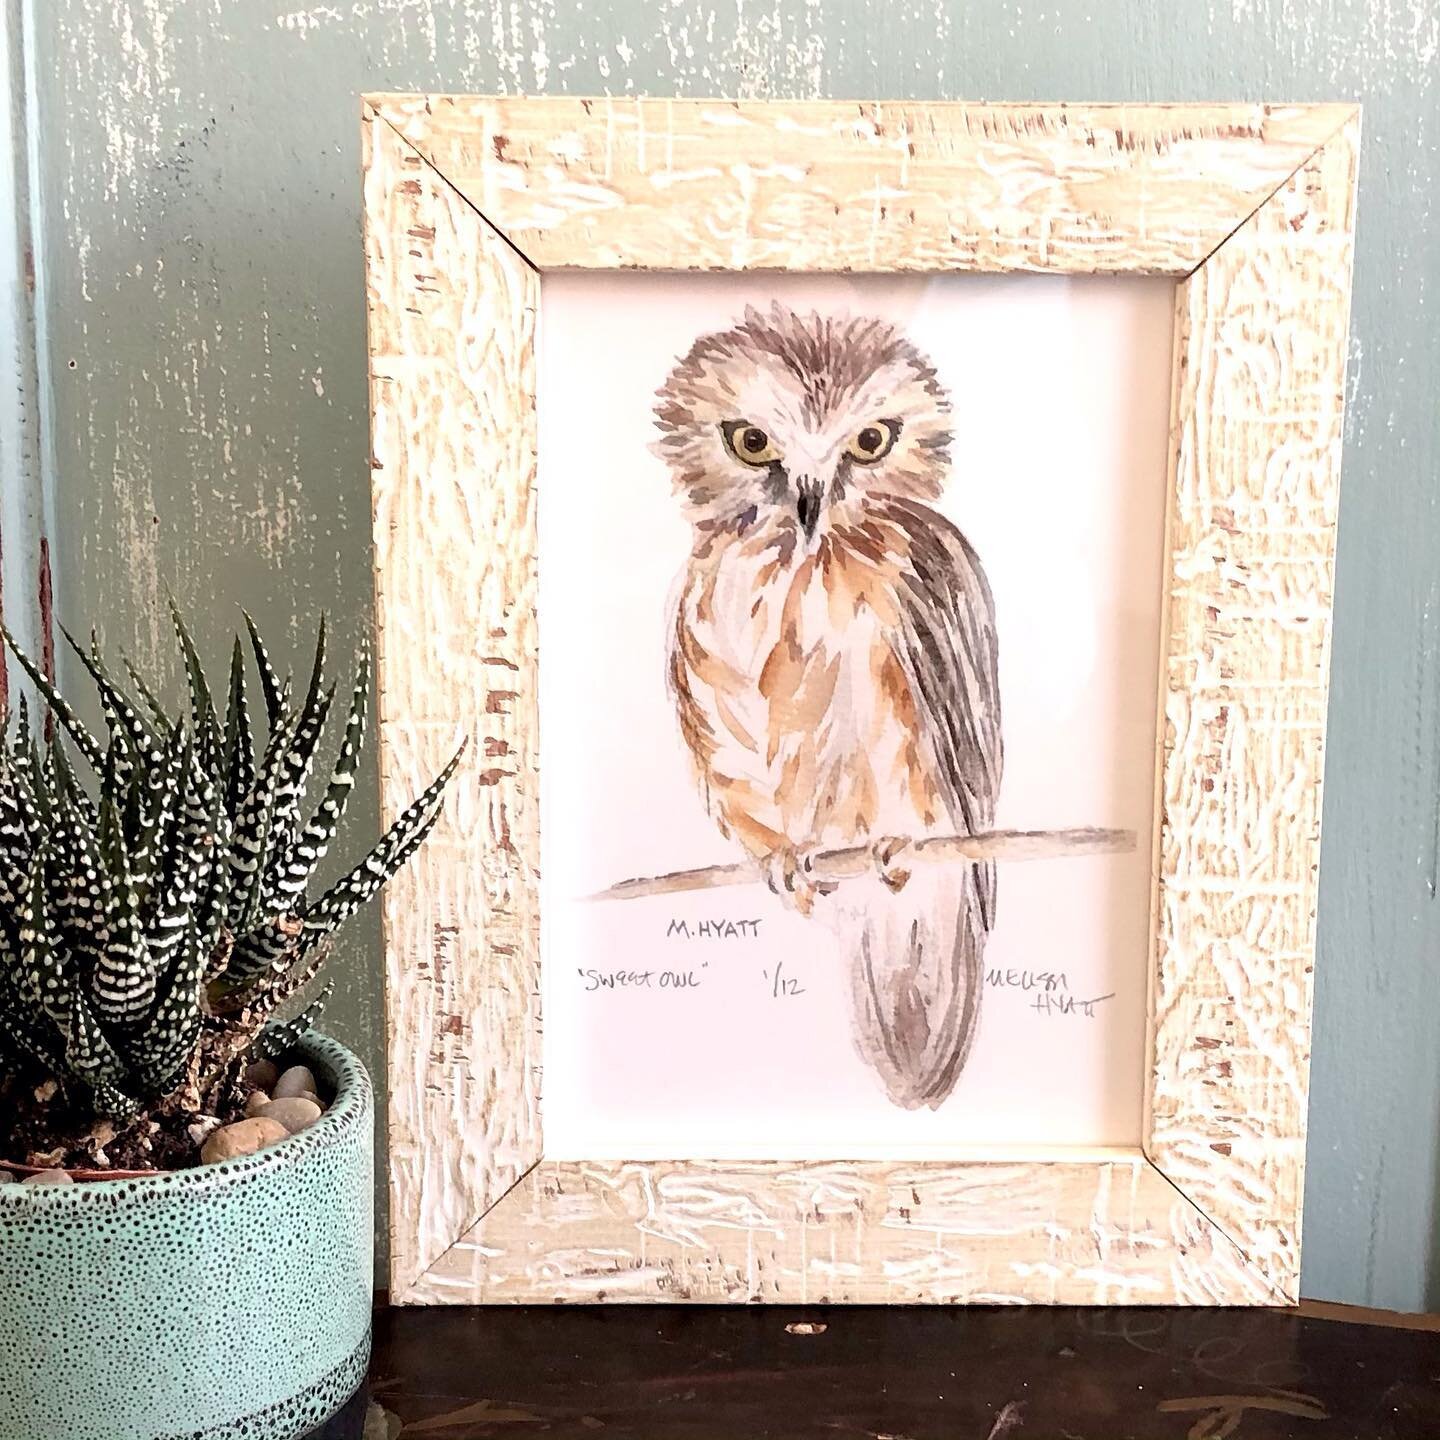 As you all know I love to paint birds. This sweet owl was created by mixing my own greys, browns and black. I don&rsquo;t buy black or grey paint but create my own hues by color mixing. These tips and techniques will be covered in my next Zoom class.